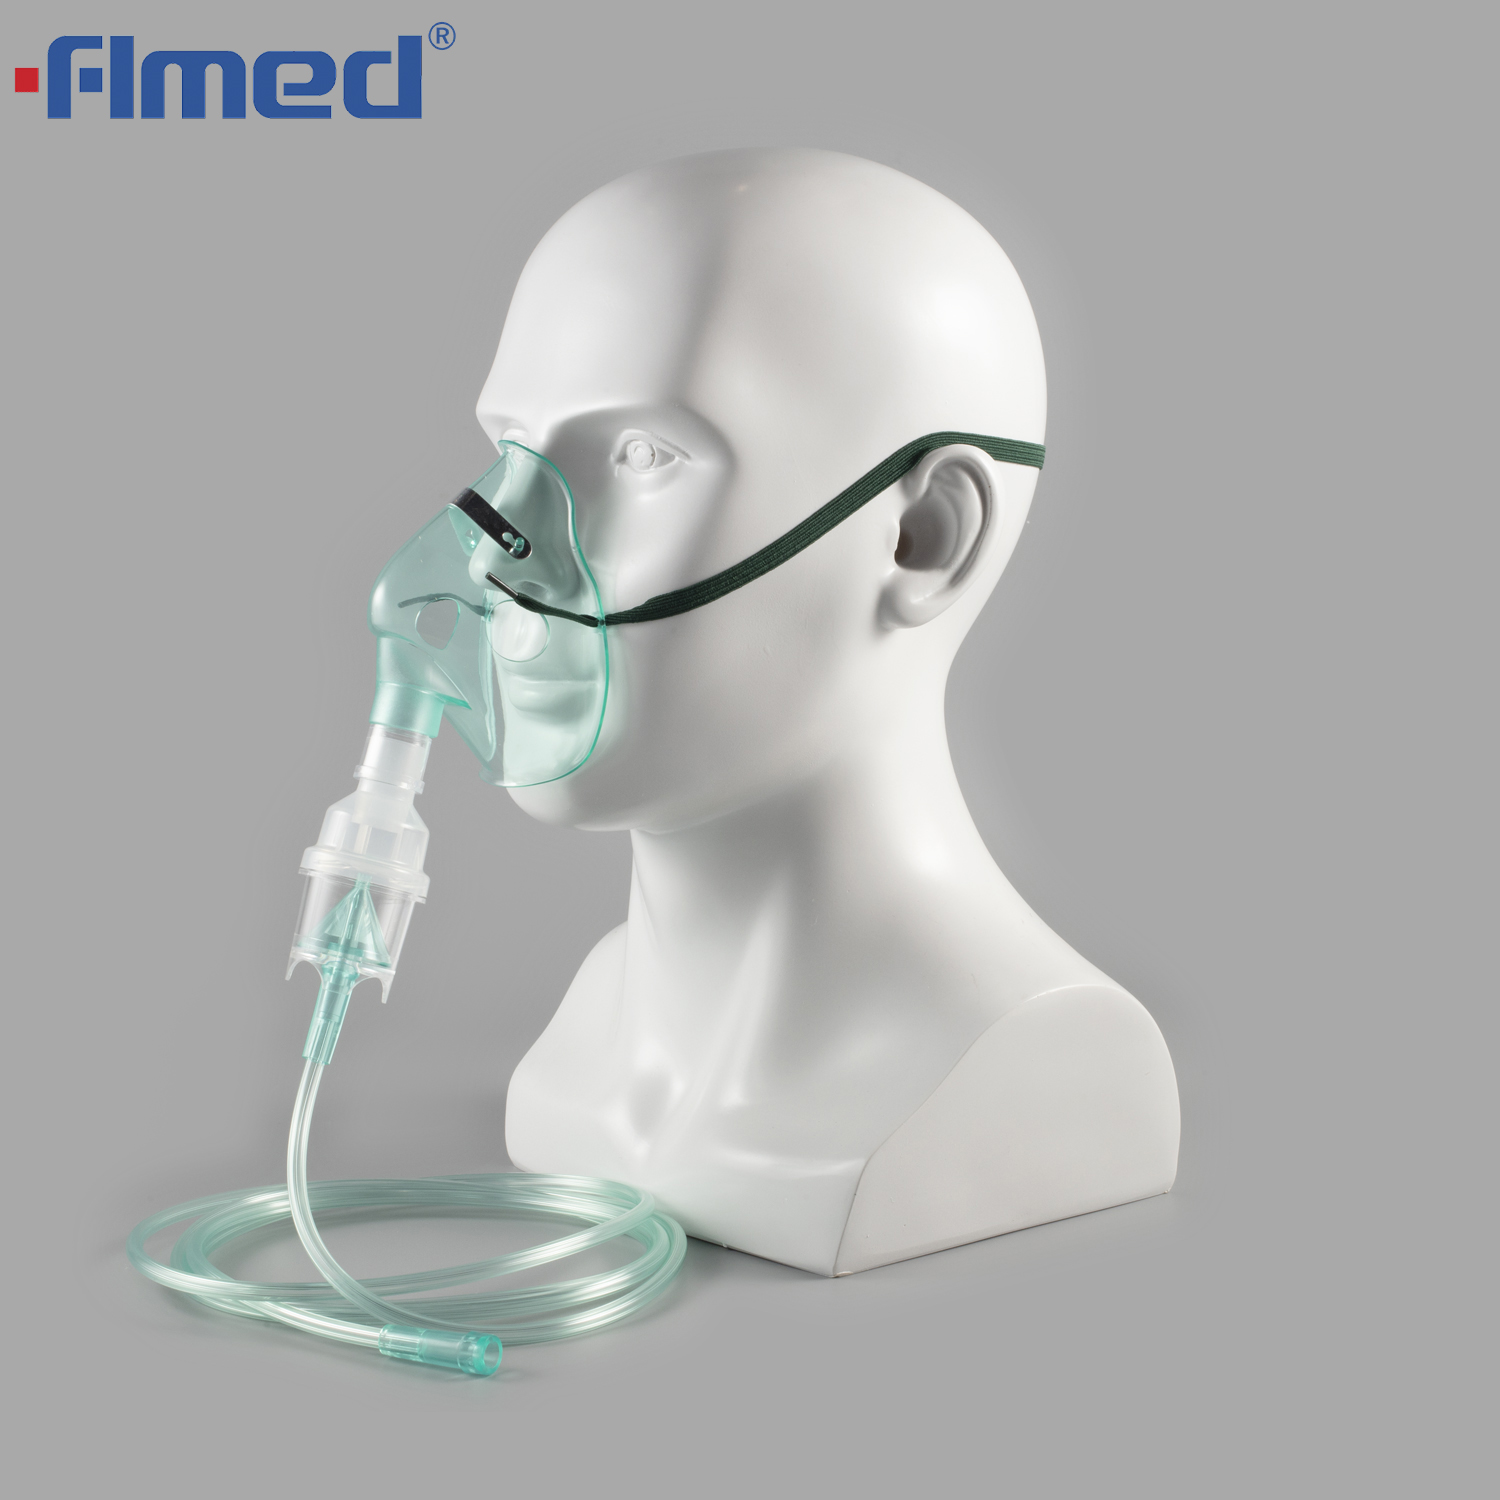 Disposable Nebulizer Mask With Tubing - Adult & Pediatric Sizes